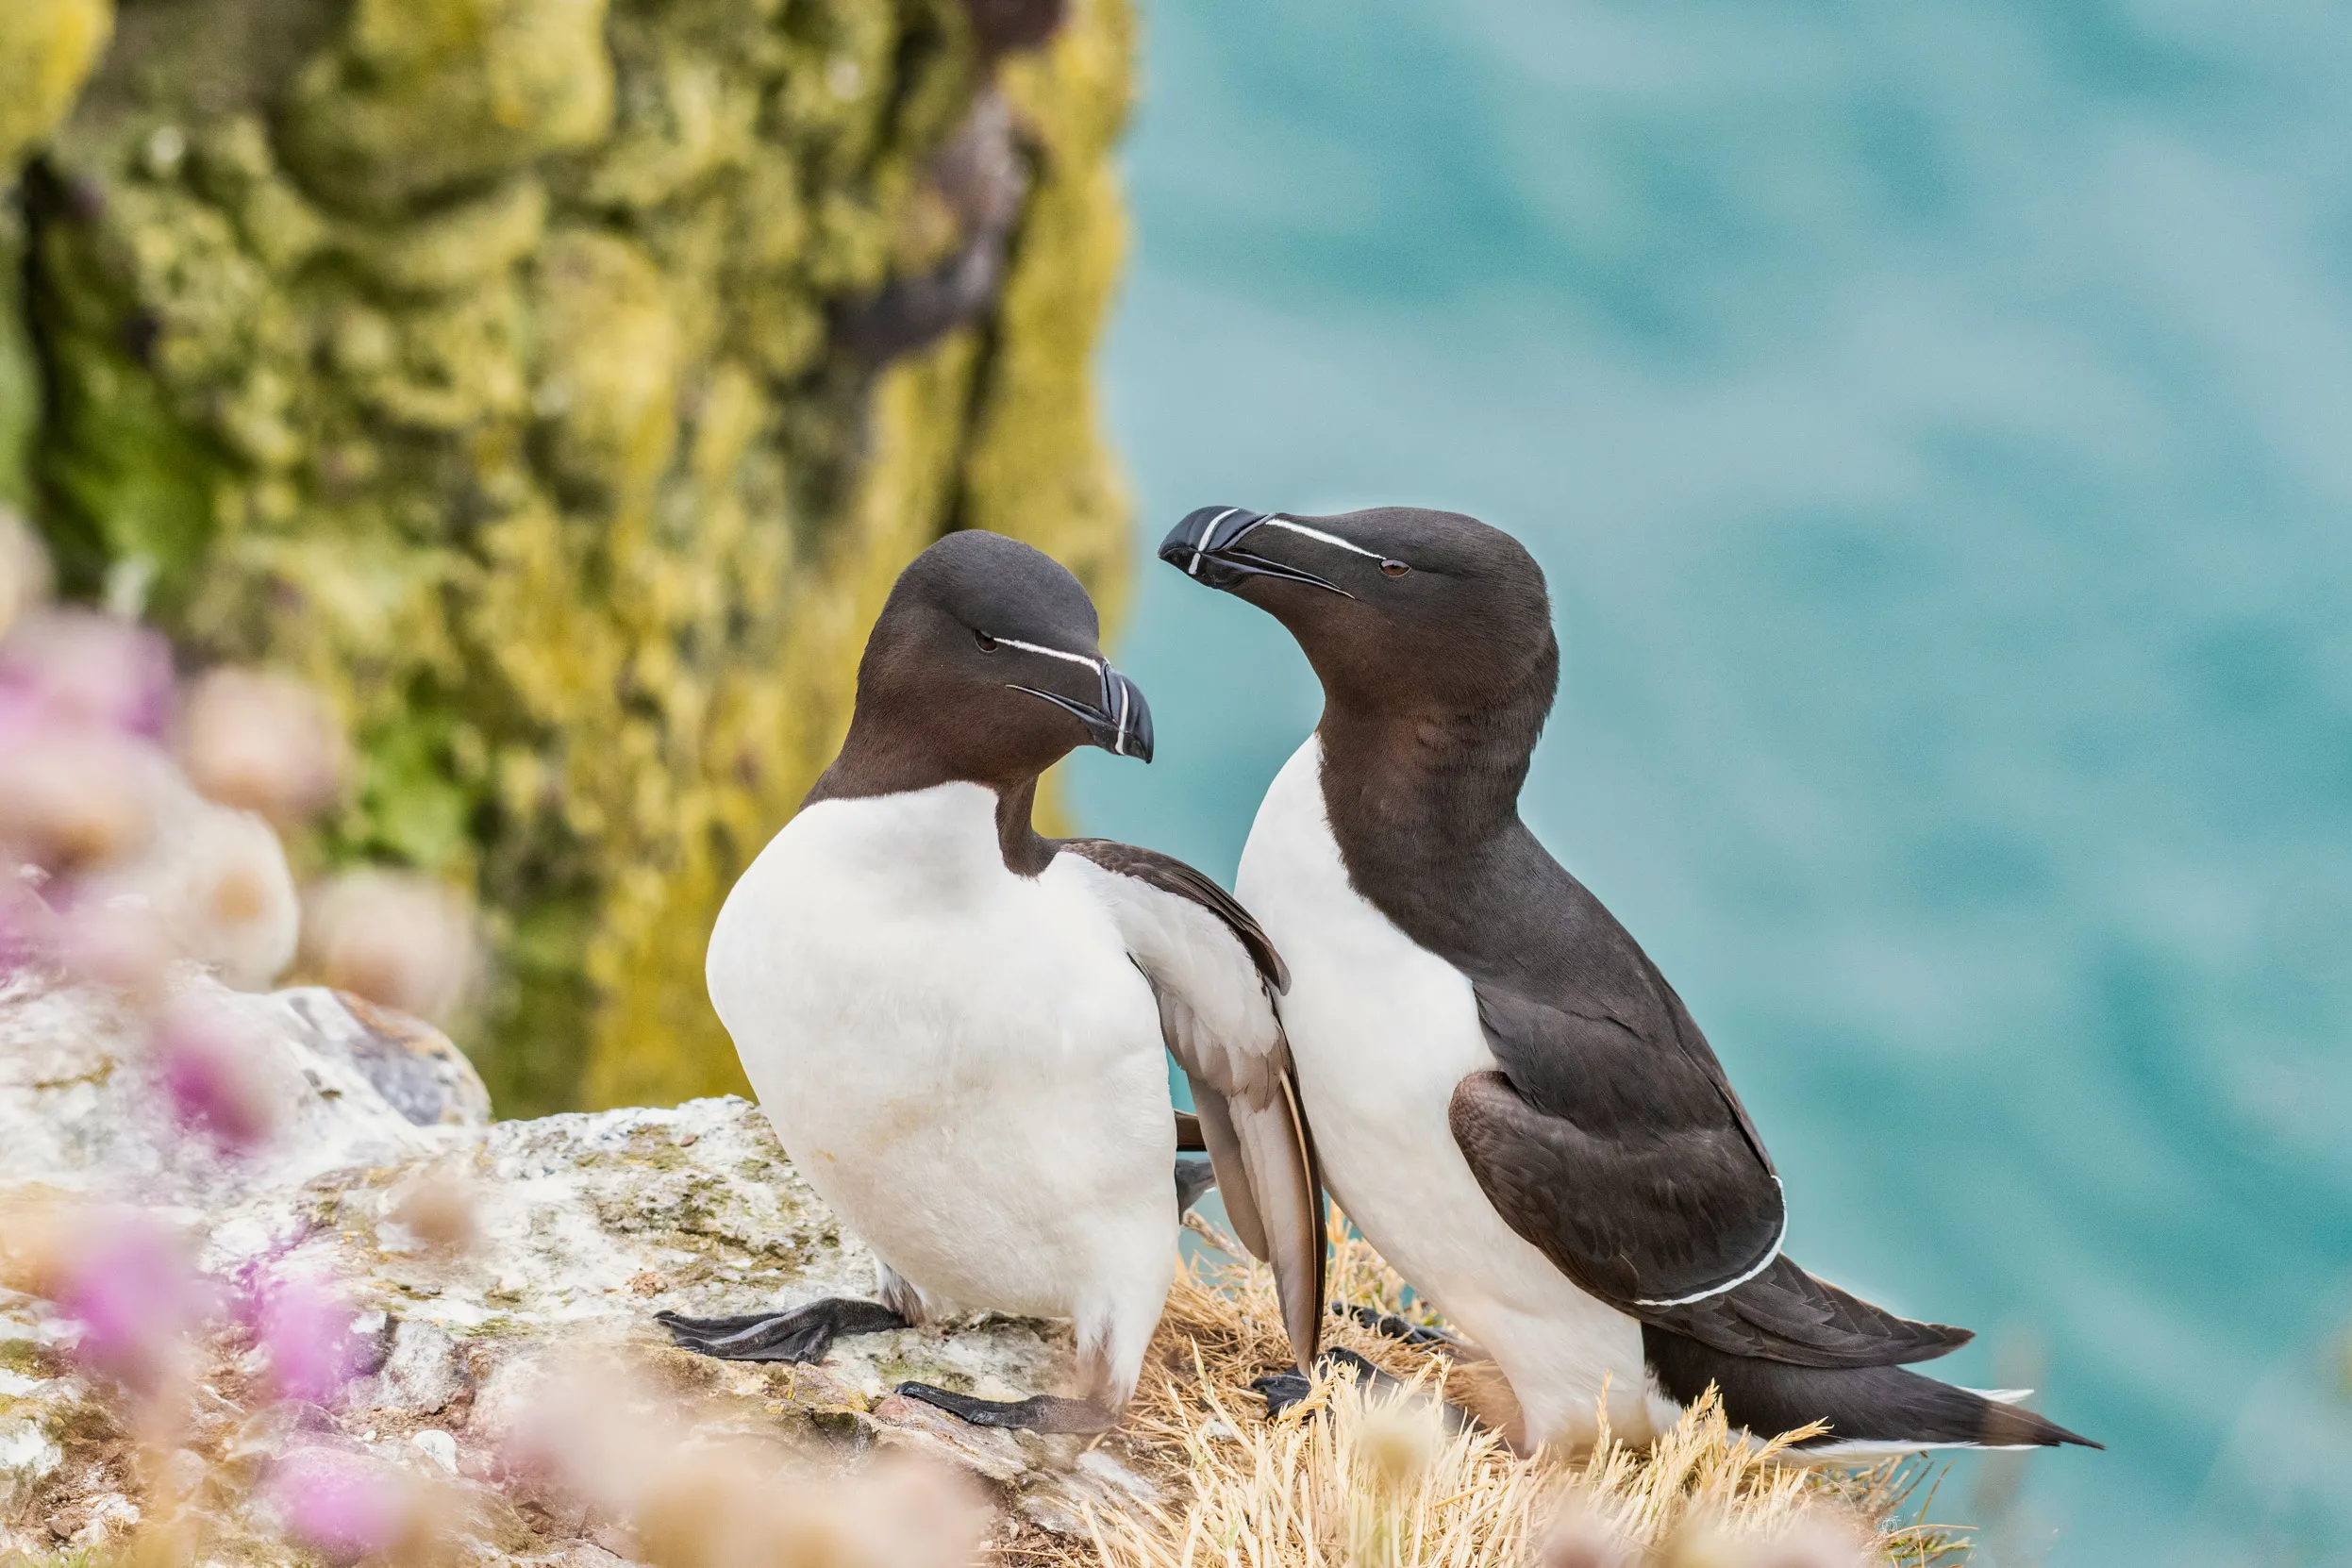 A pair of Razorbills, sat on a rocky cliff face, with bright blue water in the background and pink flowers in the foreground.